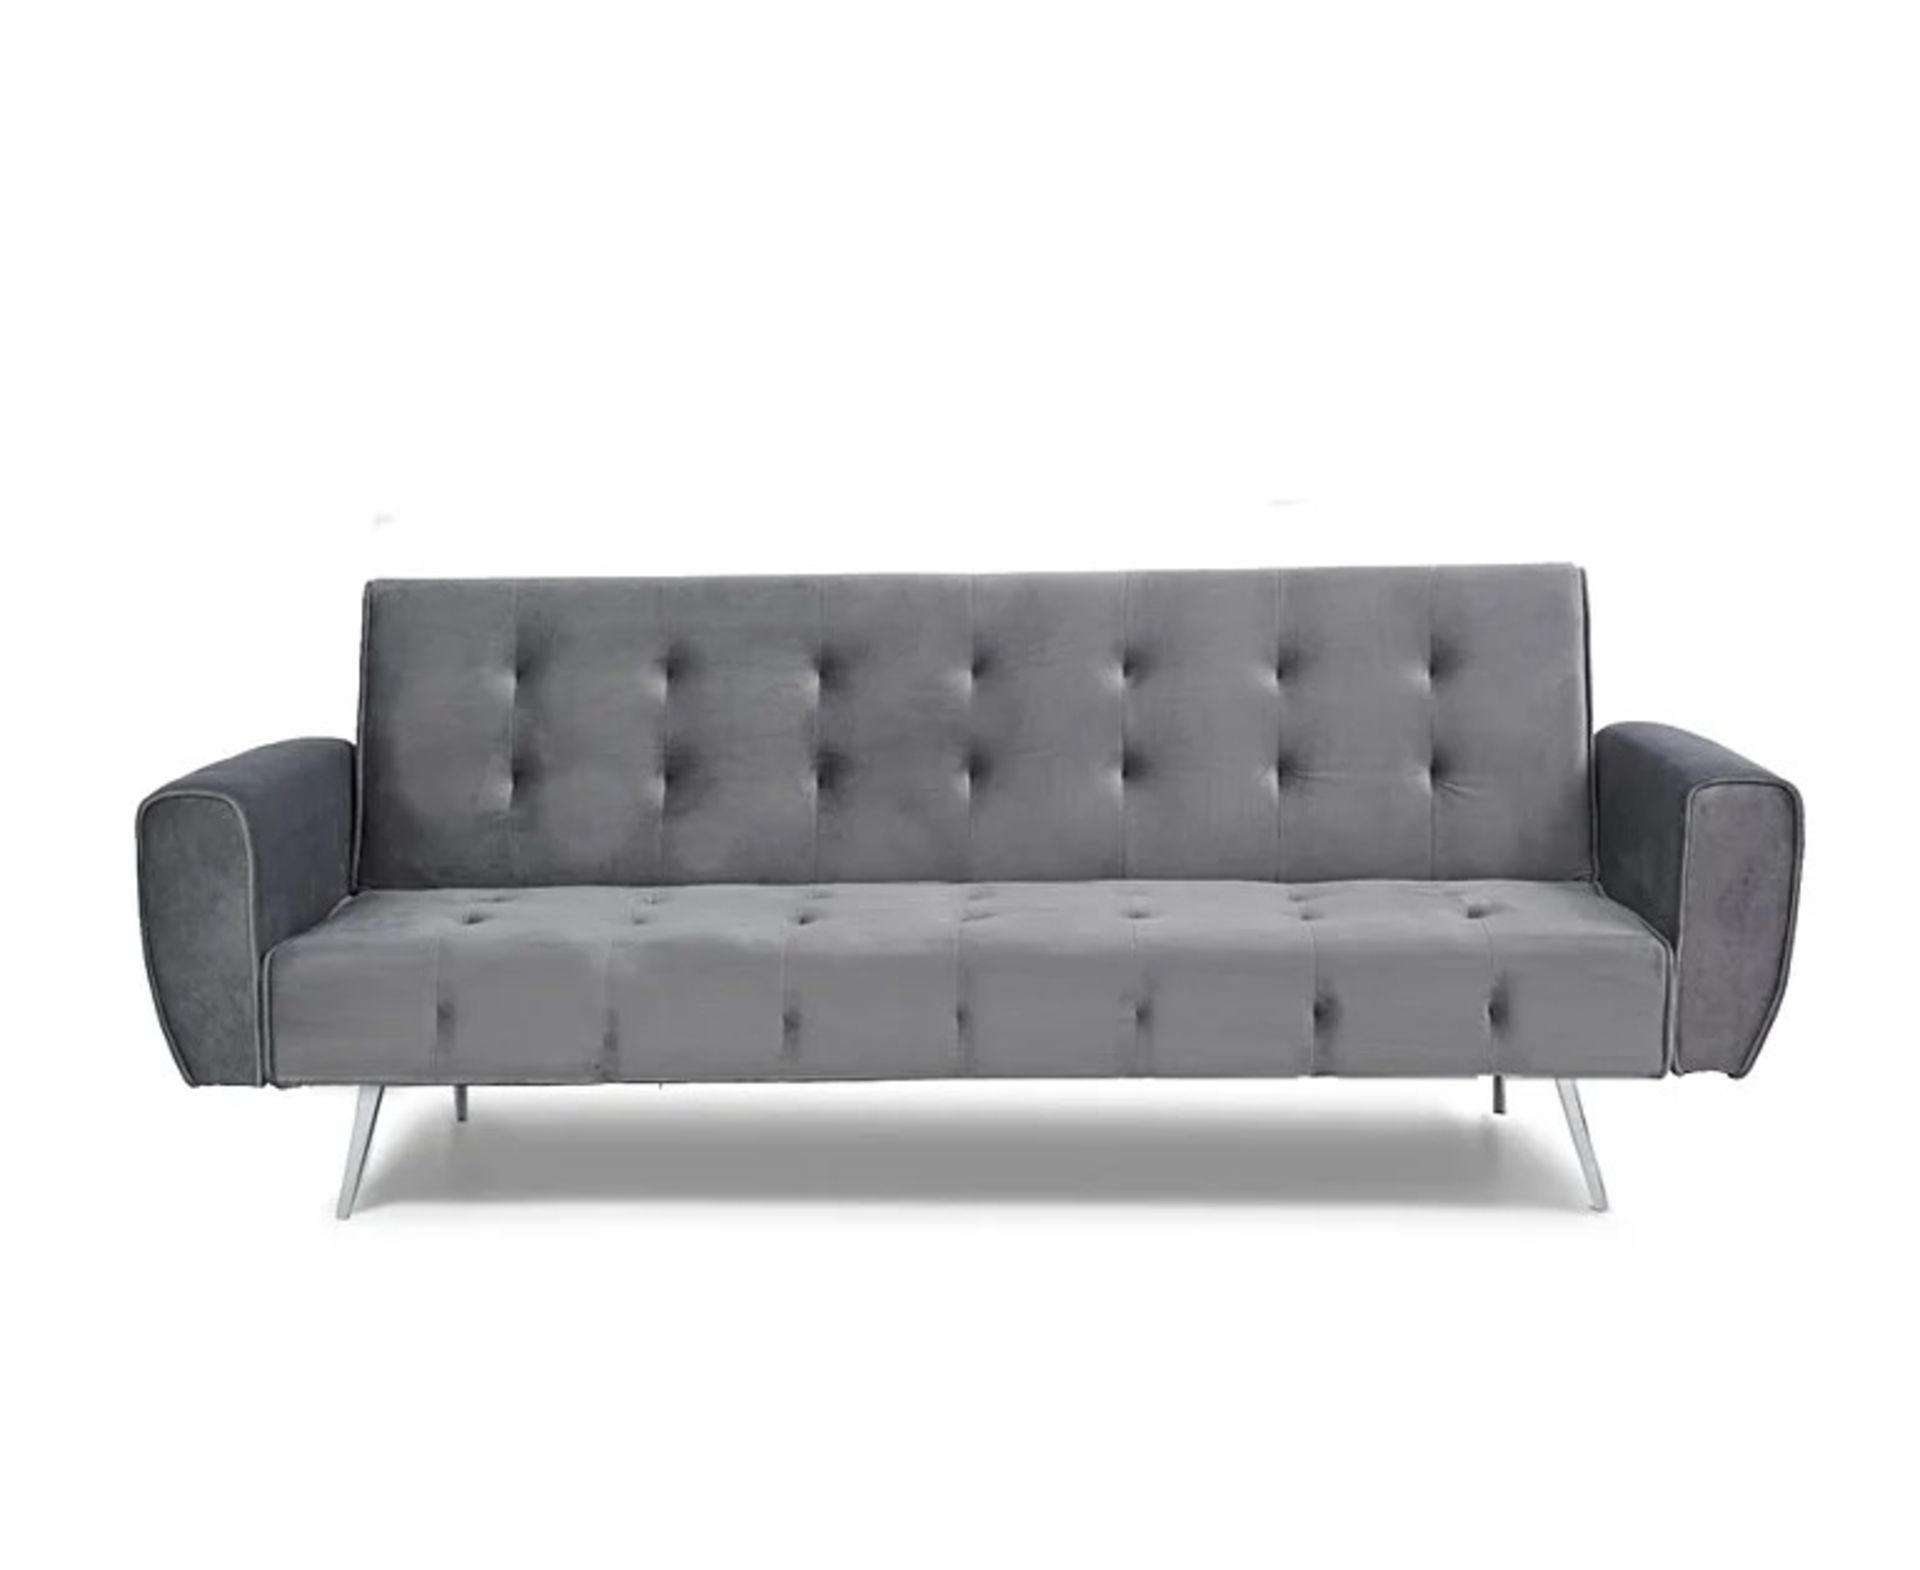 Vanessa Sofa Bed in Grey Velvet Retro-inspired and minimalist in shape, the Vanessa collection is